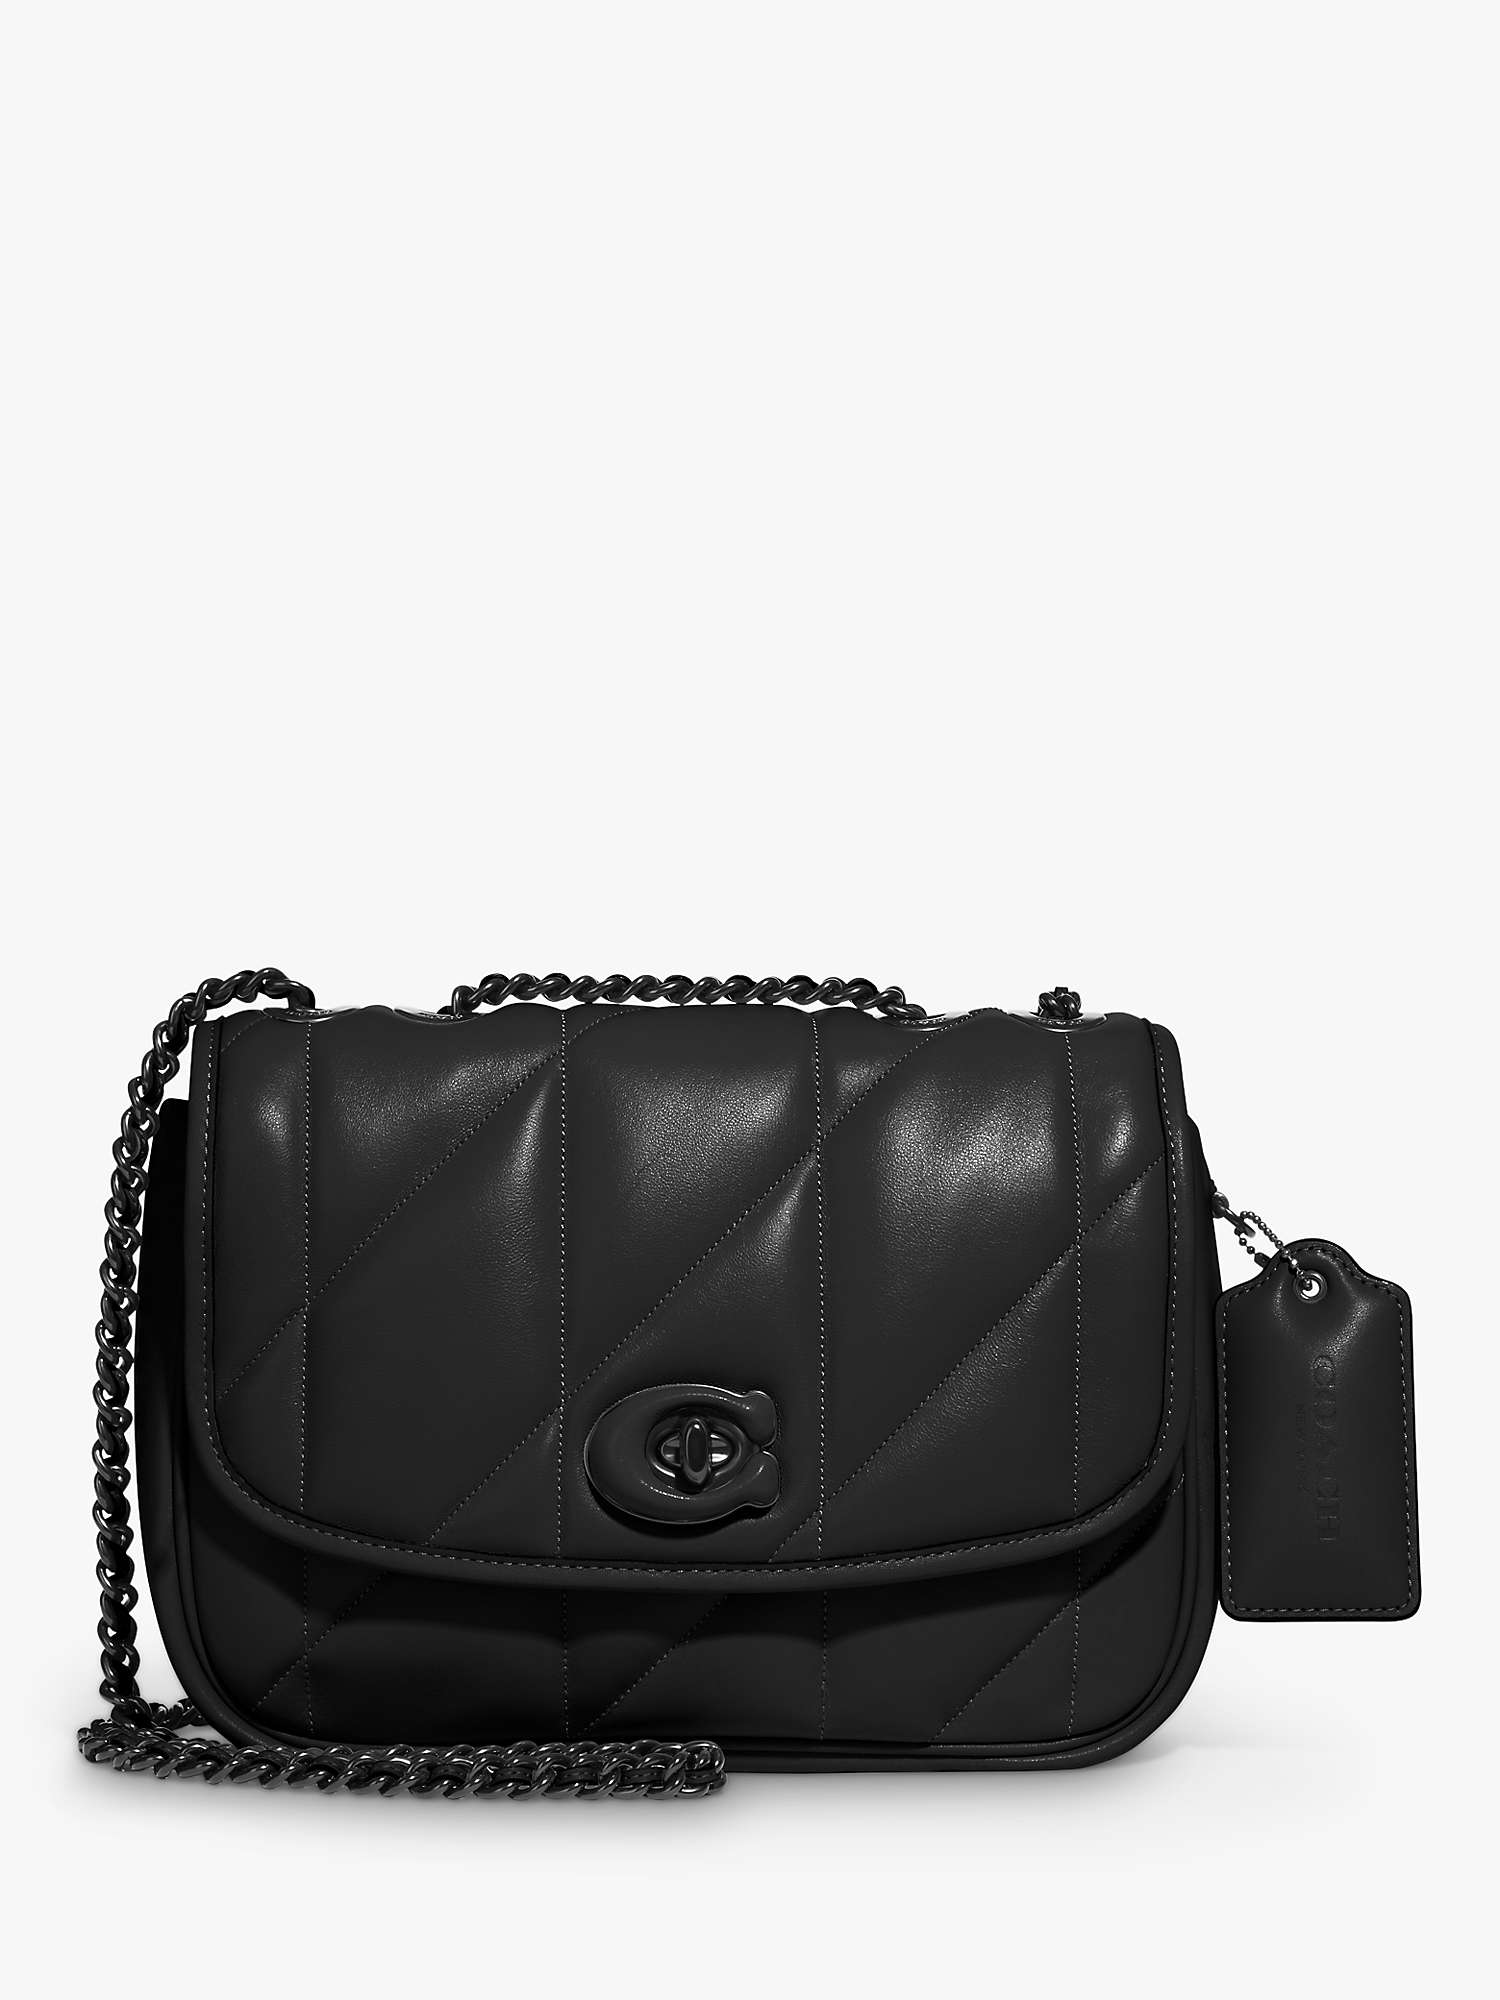 Coach Pillow Madison Quilted Leather Shoulder Bag, Black at John Lewis ...